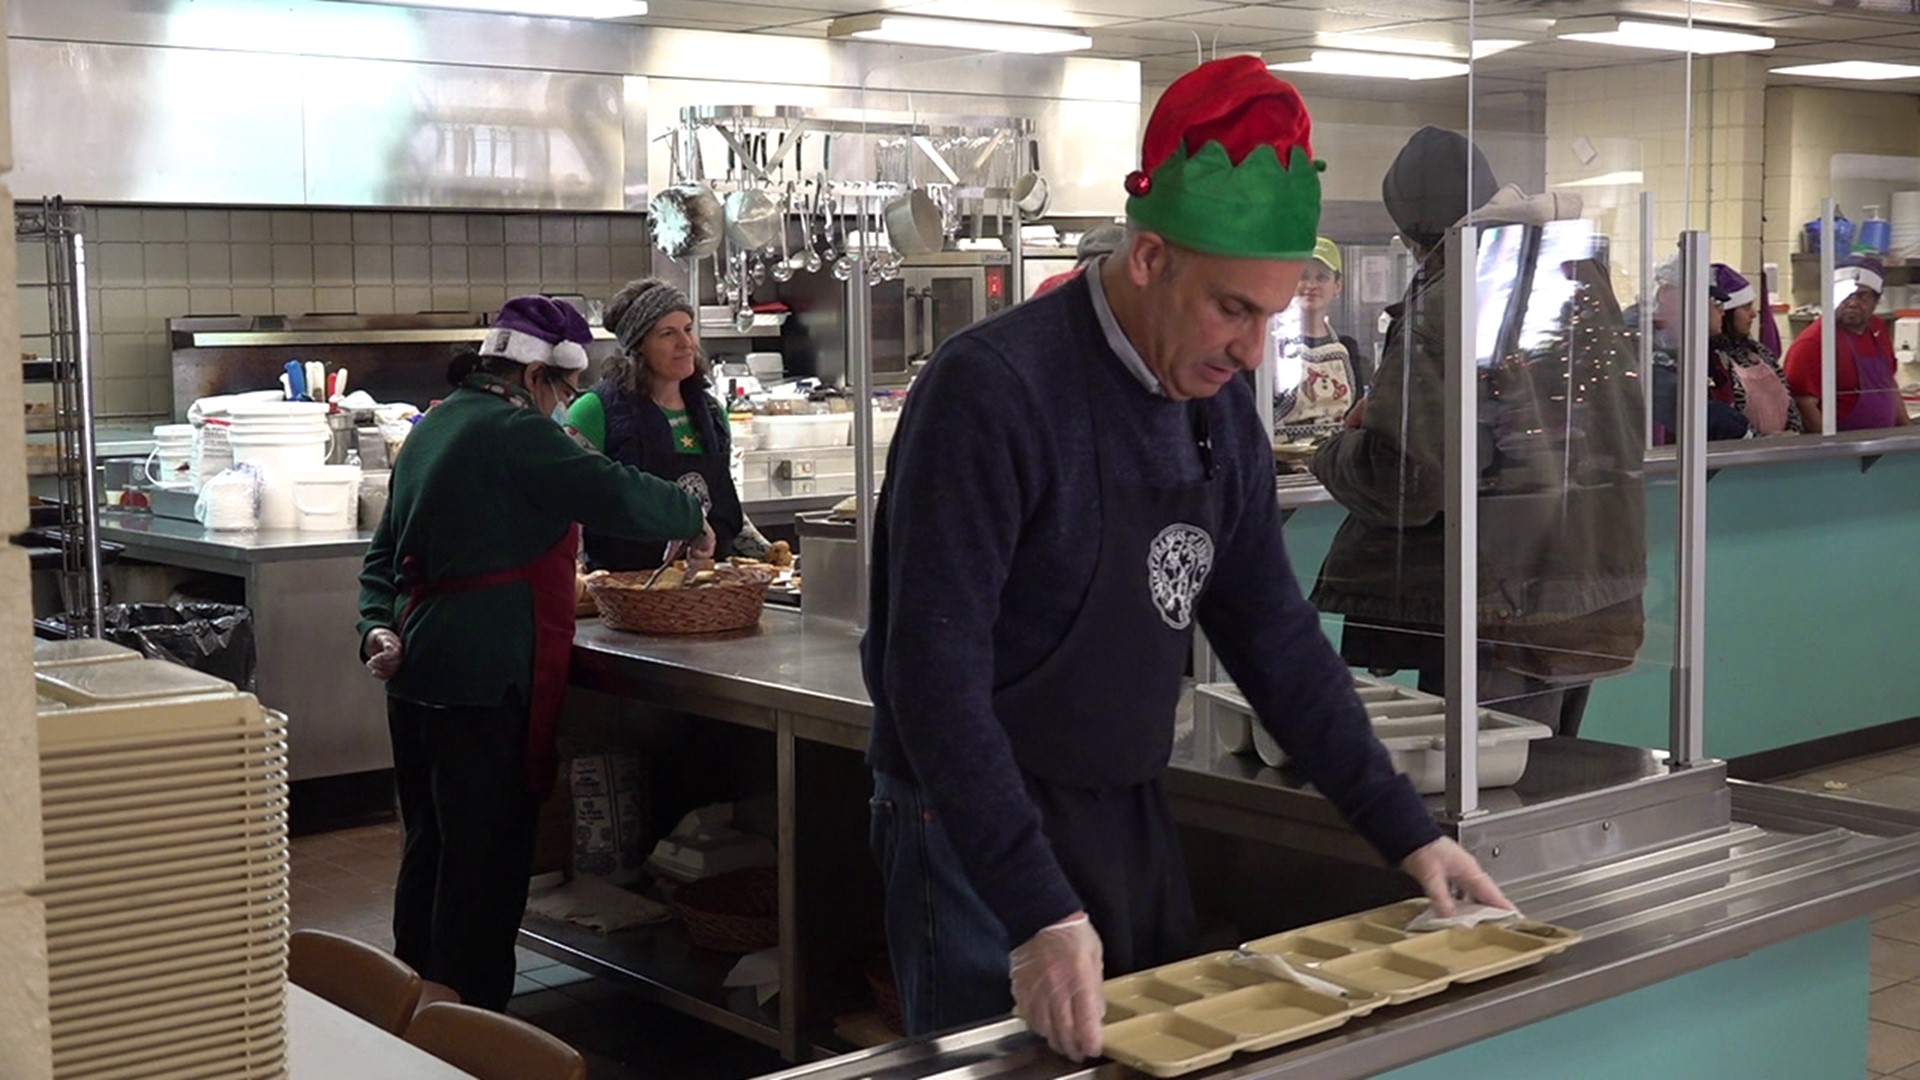 Some folks spent Christmas Day behind the counter at Saint Francis of Assisi Kitchen.